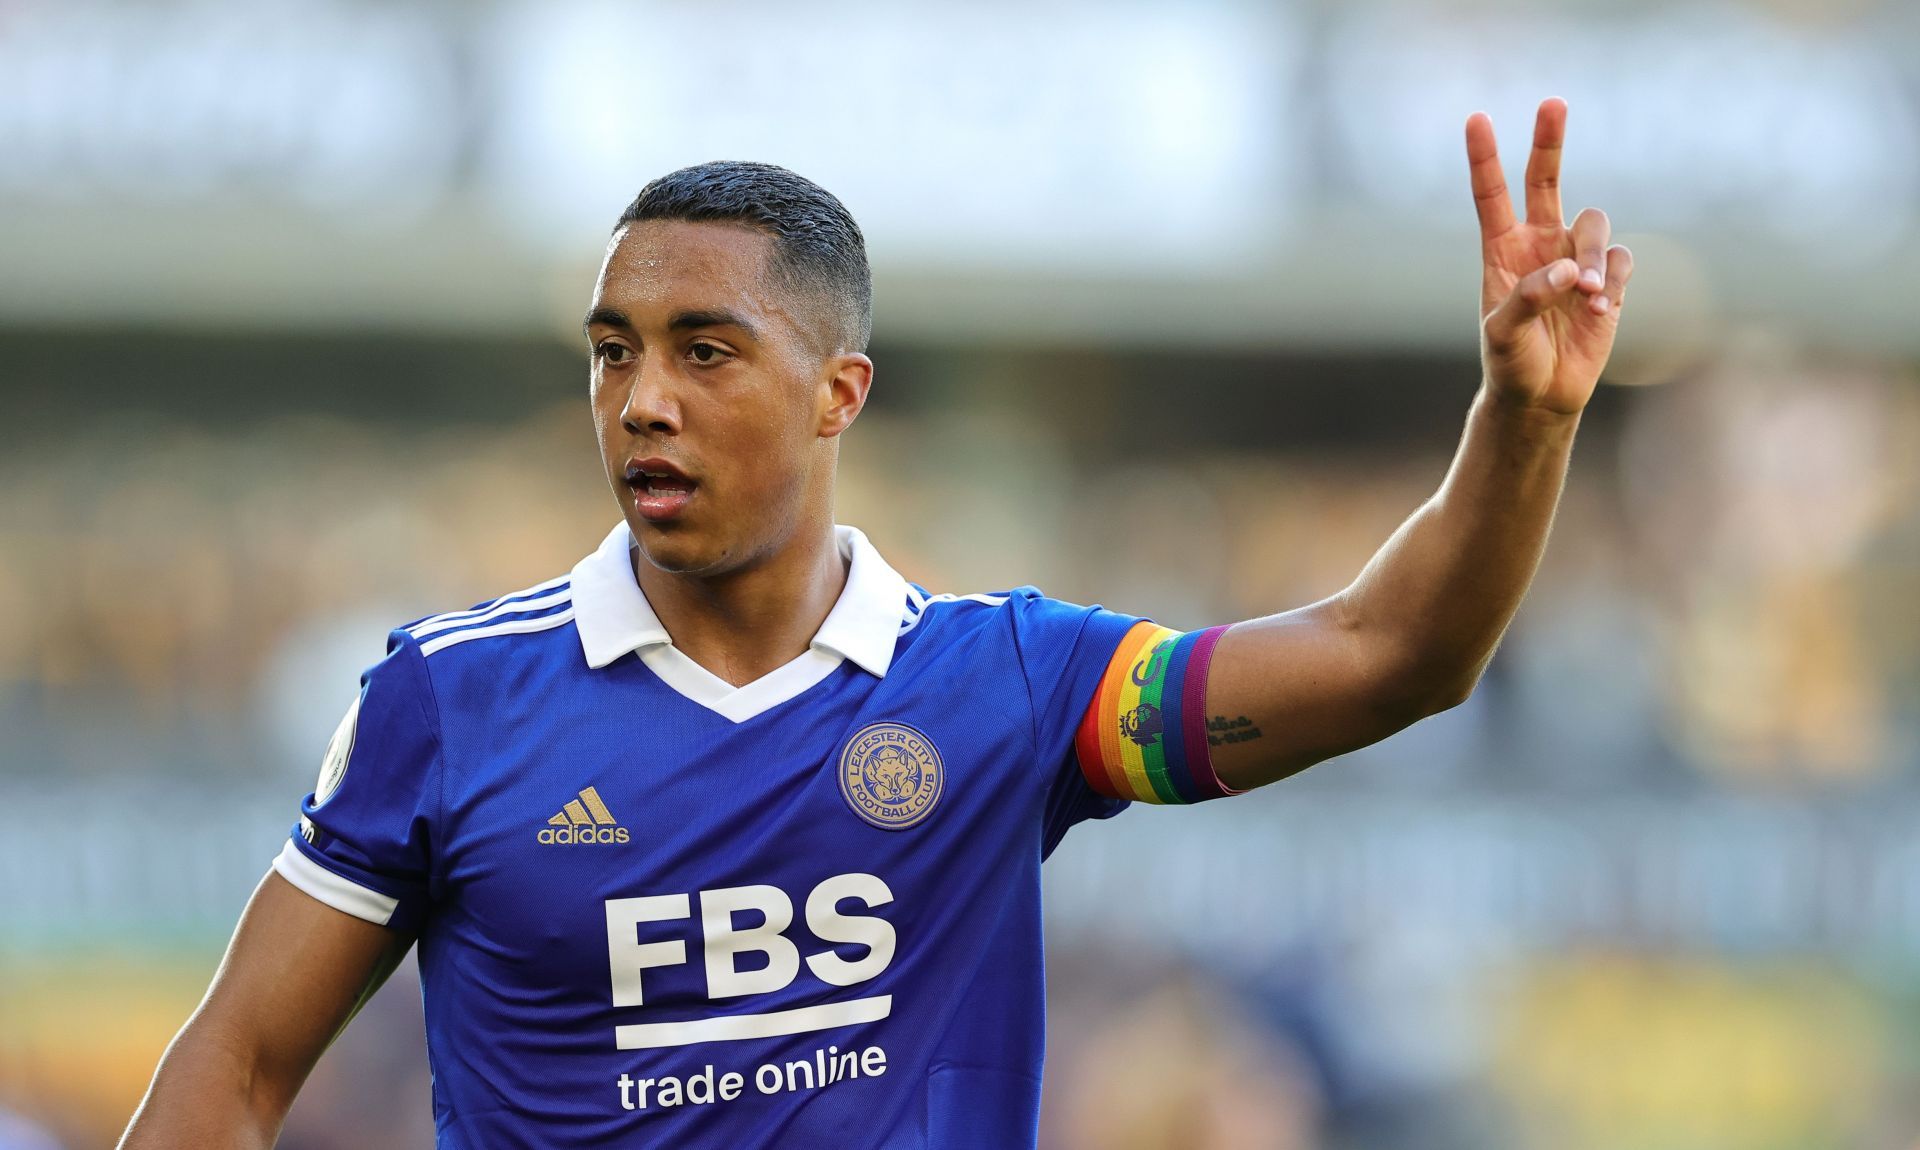 Youri Tielemans has registered three goals from 15 appearances this season.